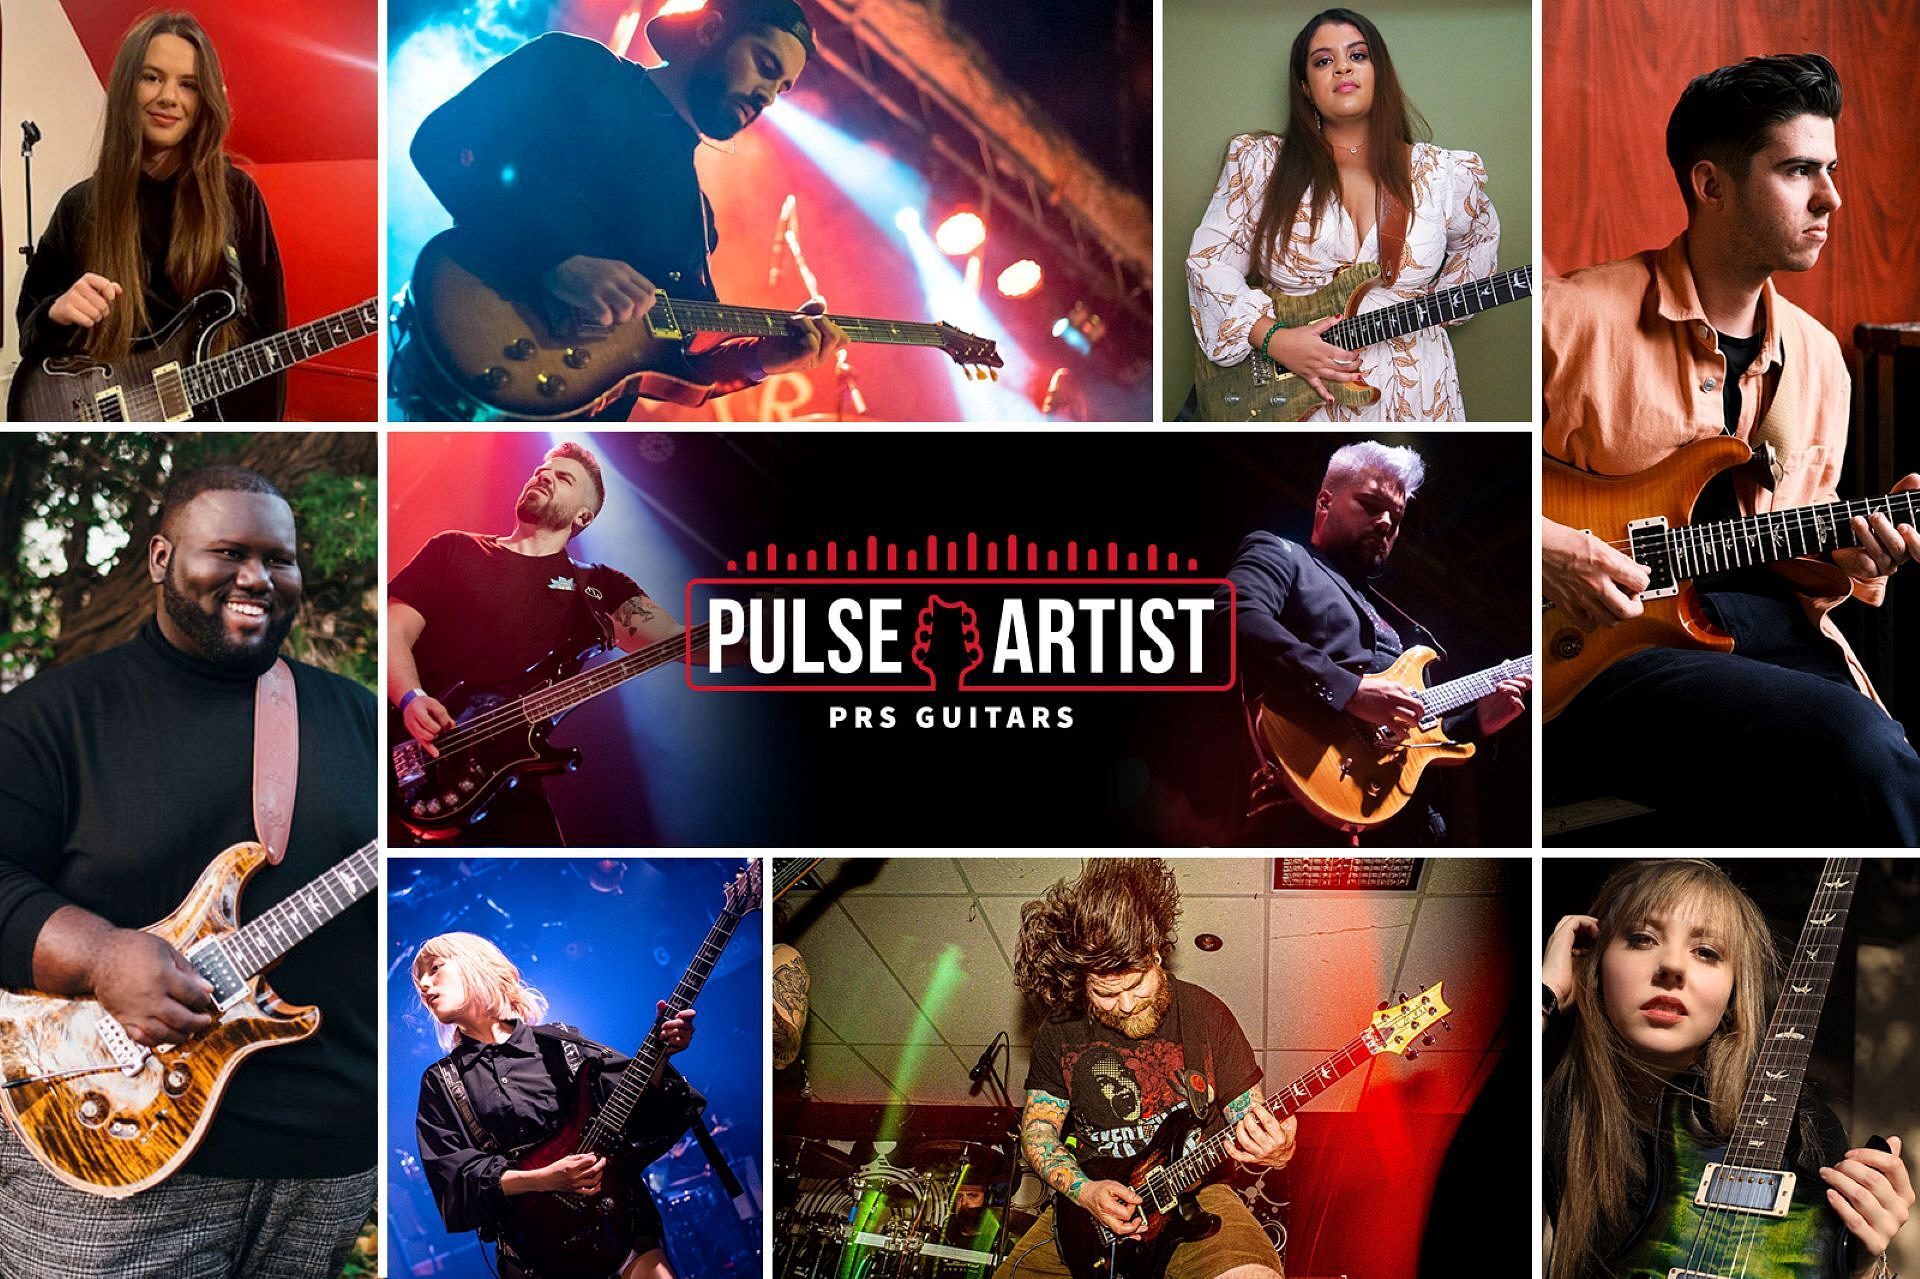 More Fresh Music From PRS Pulse Artists!